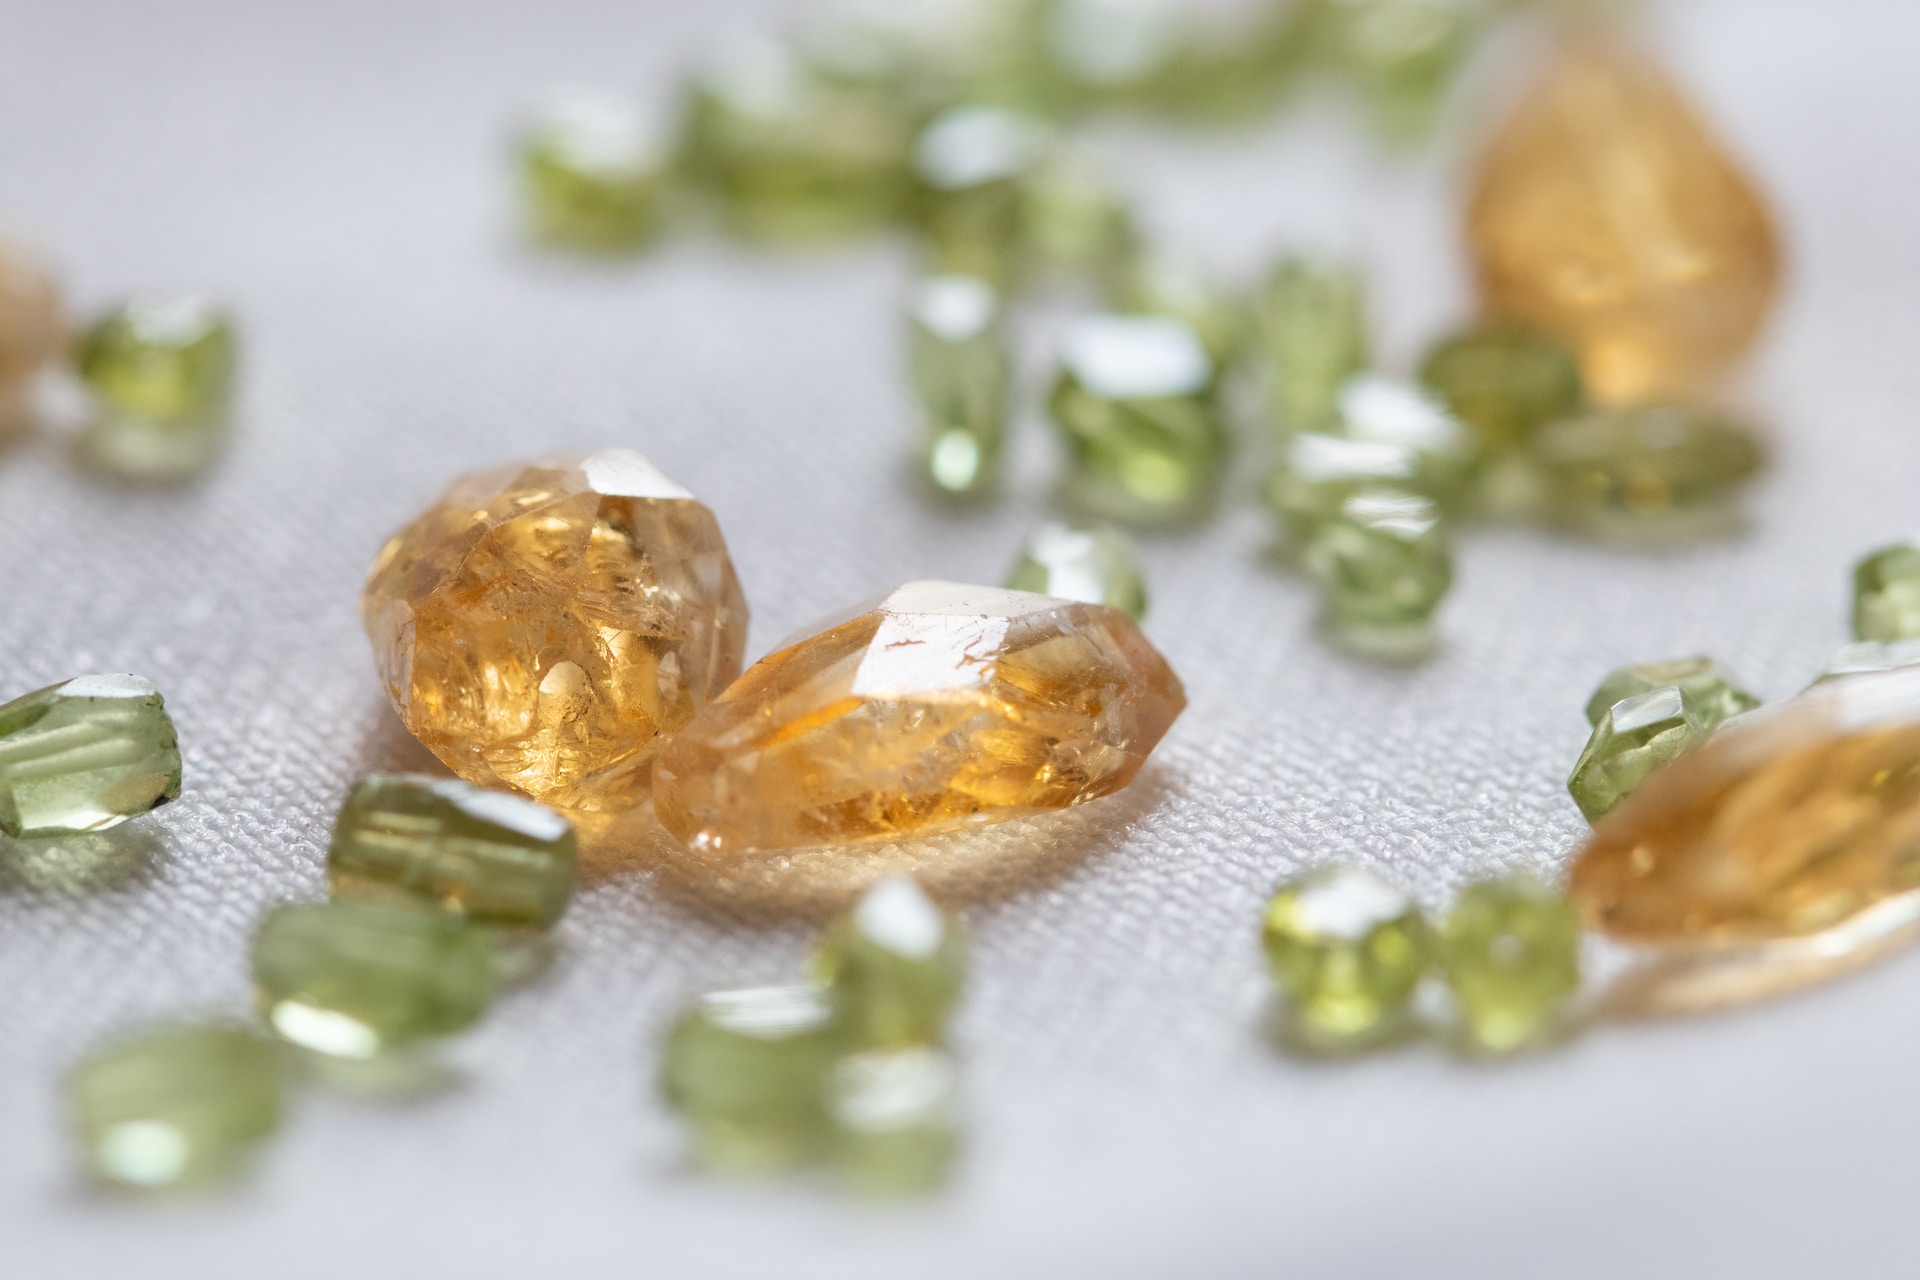 What is your birthstone? Here you see golden topaz and peridot.